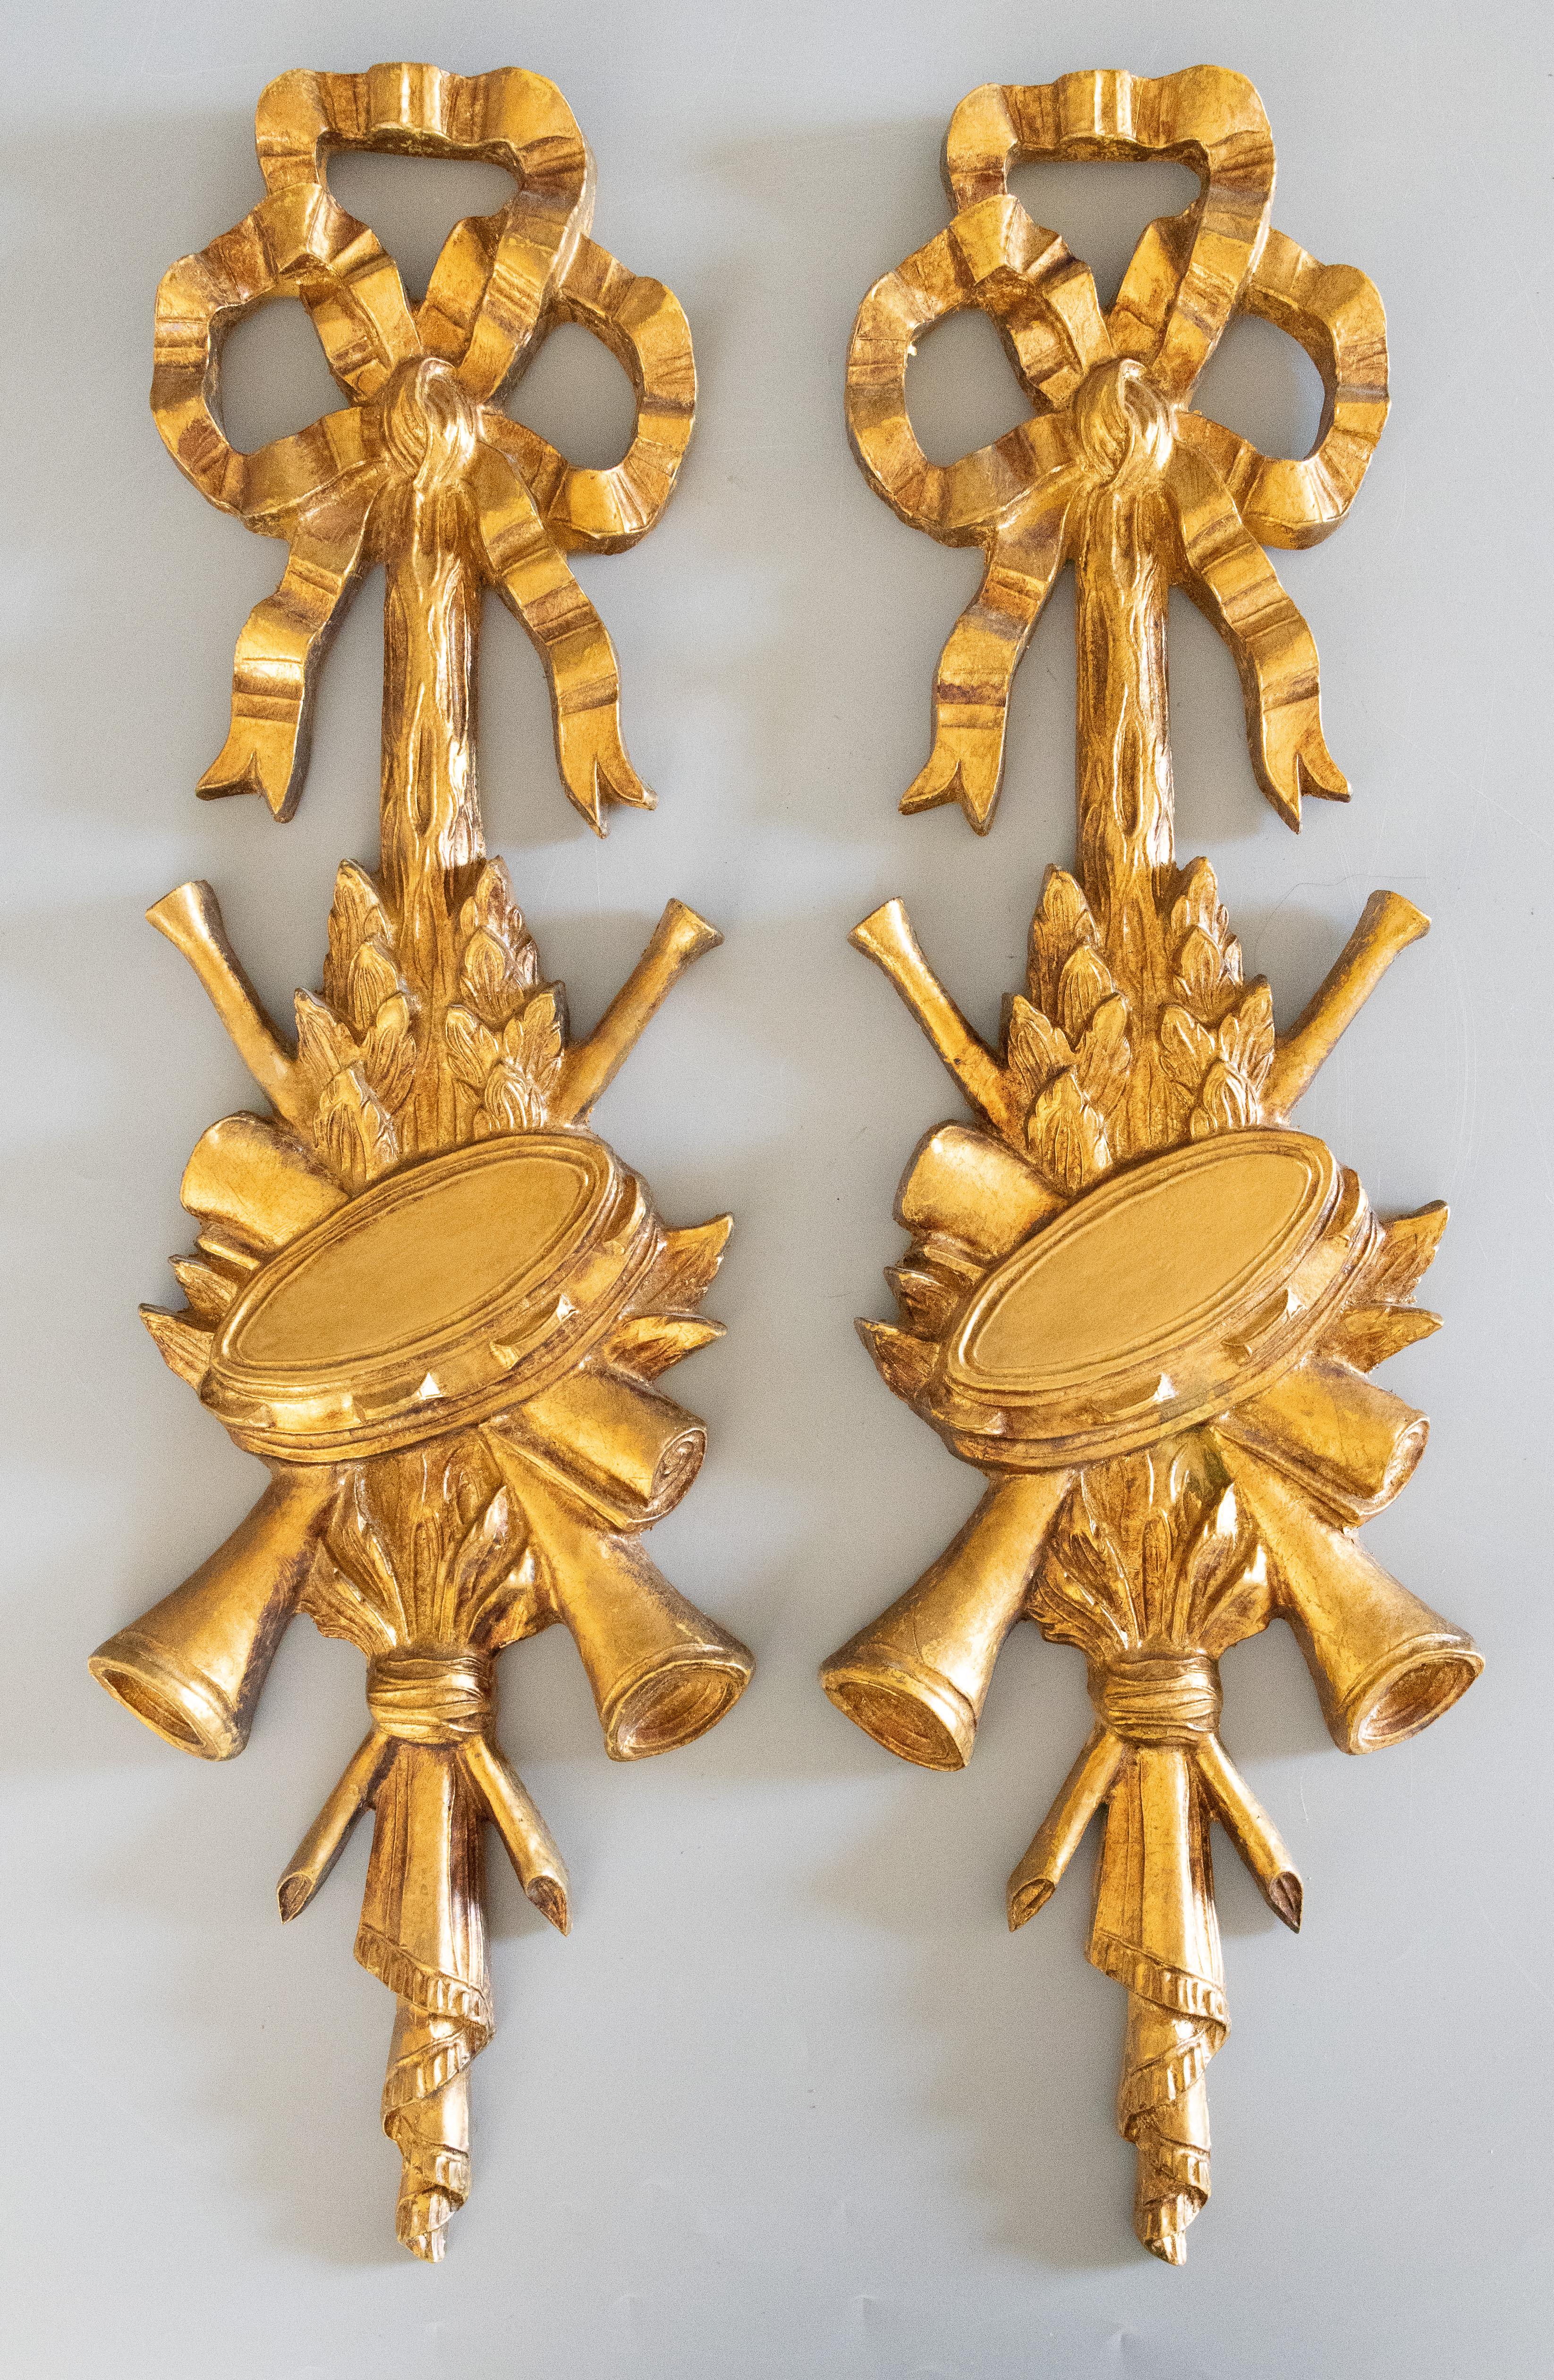 A gorgeous pair of Mid-Century Neoclassical Italian carved gilt wood musical instruments wall garland / accents / ornaments. These fabulous wall hangings have carved bows, tambourines, horns, and laurel garland in a beautiful gilt patina and would